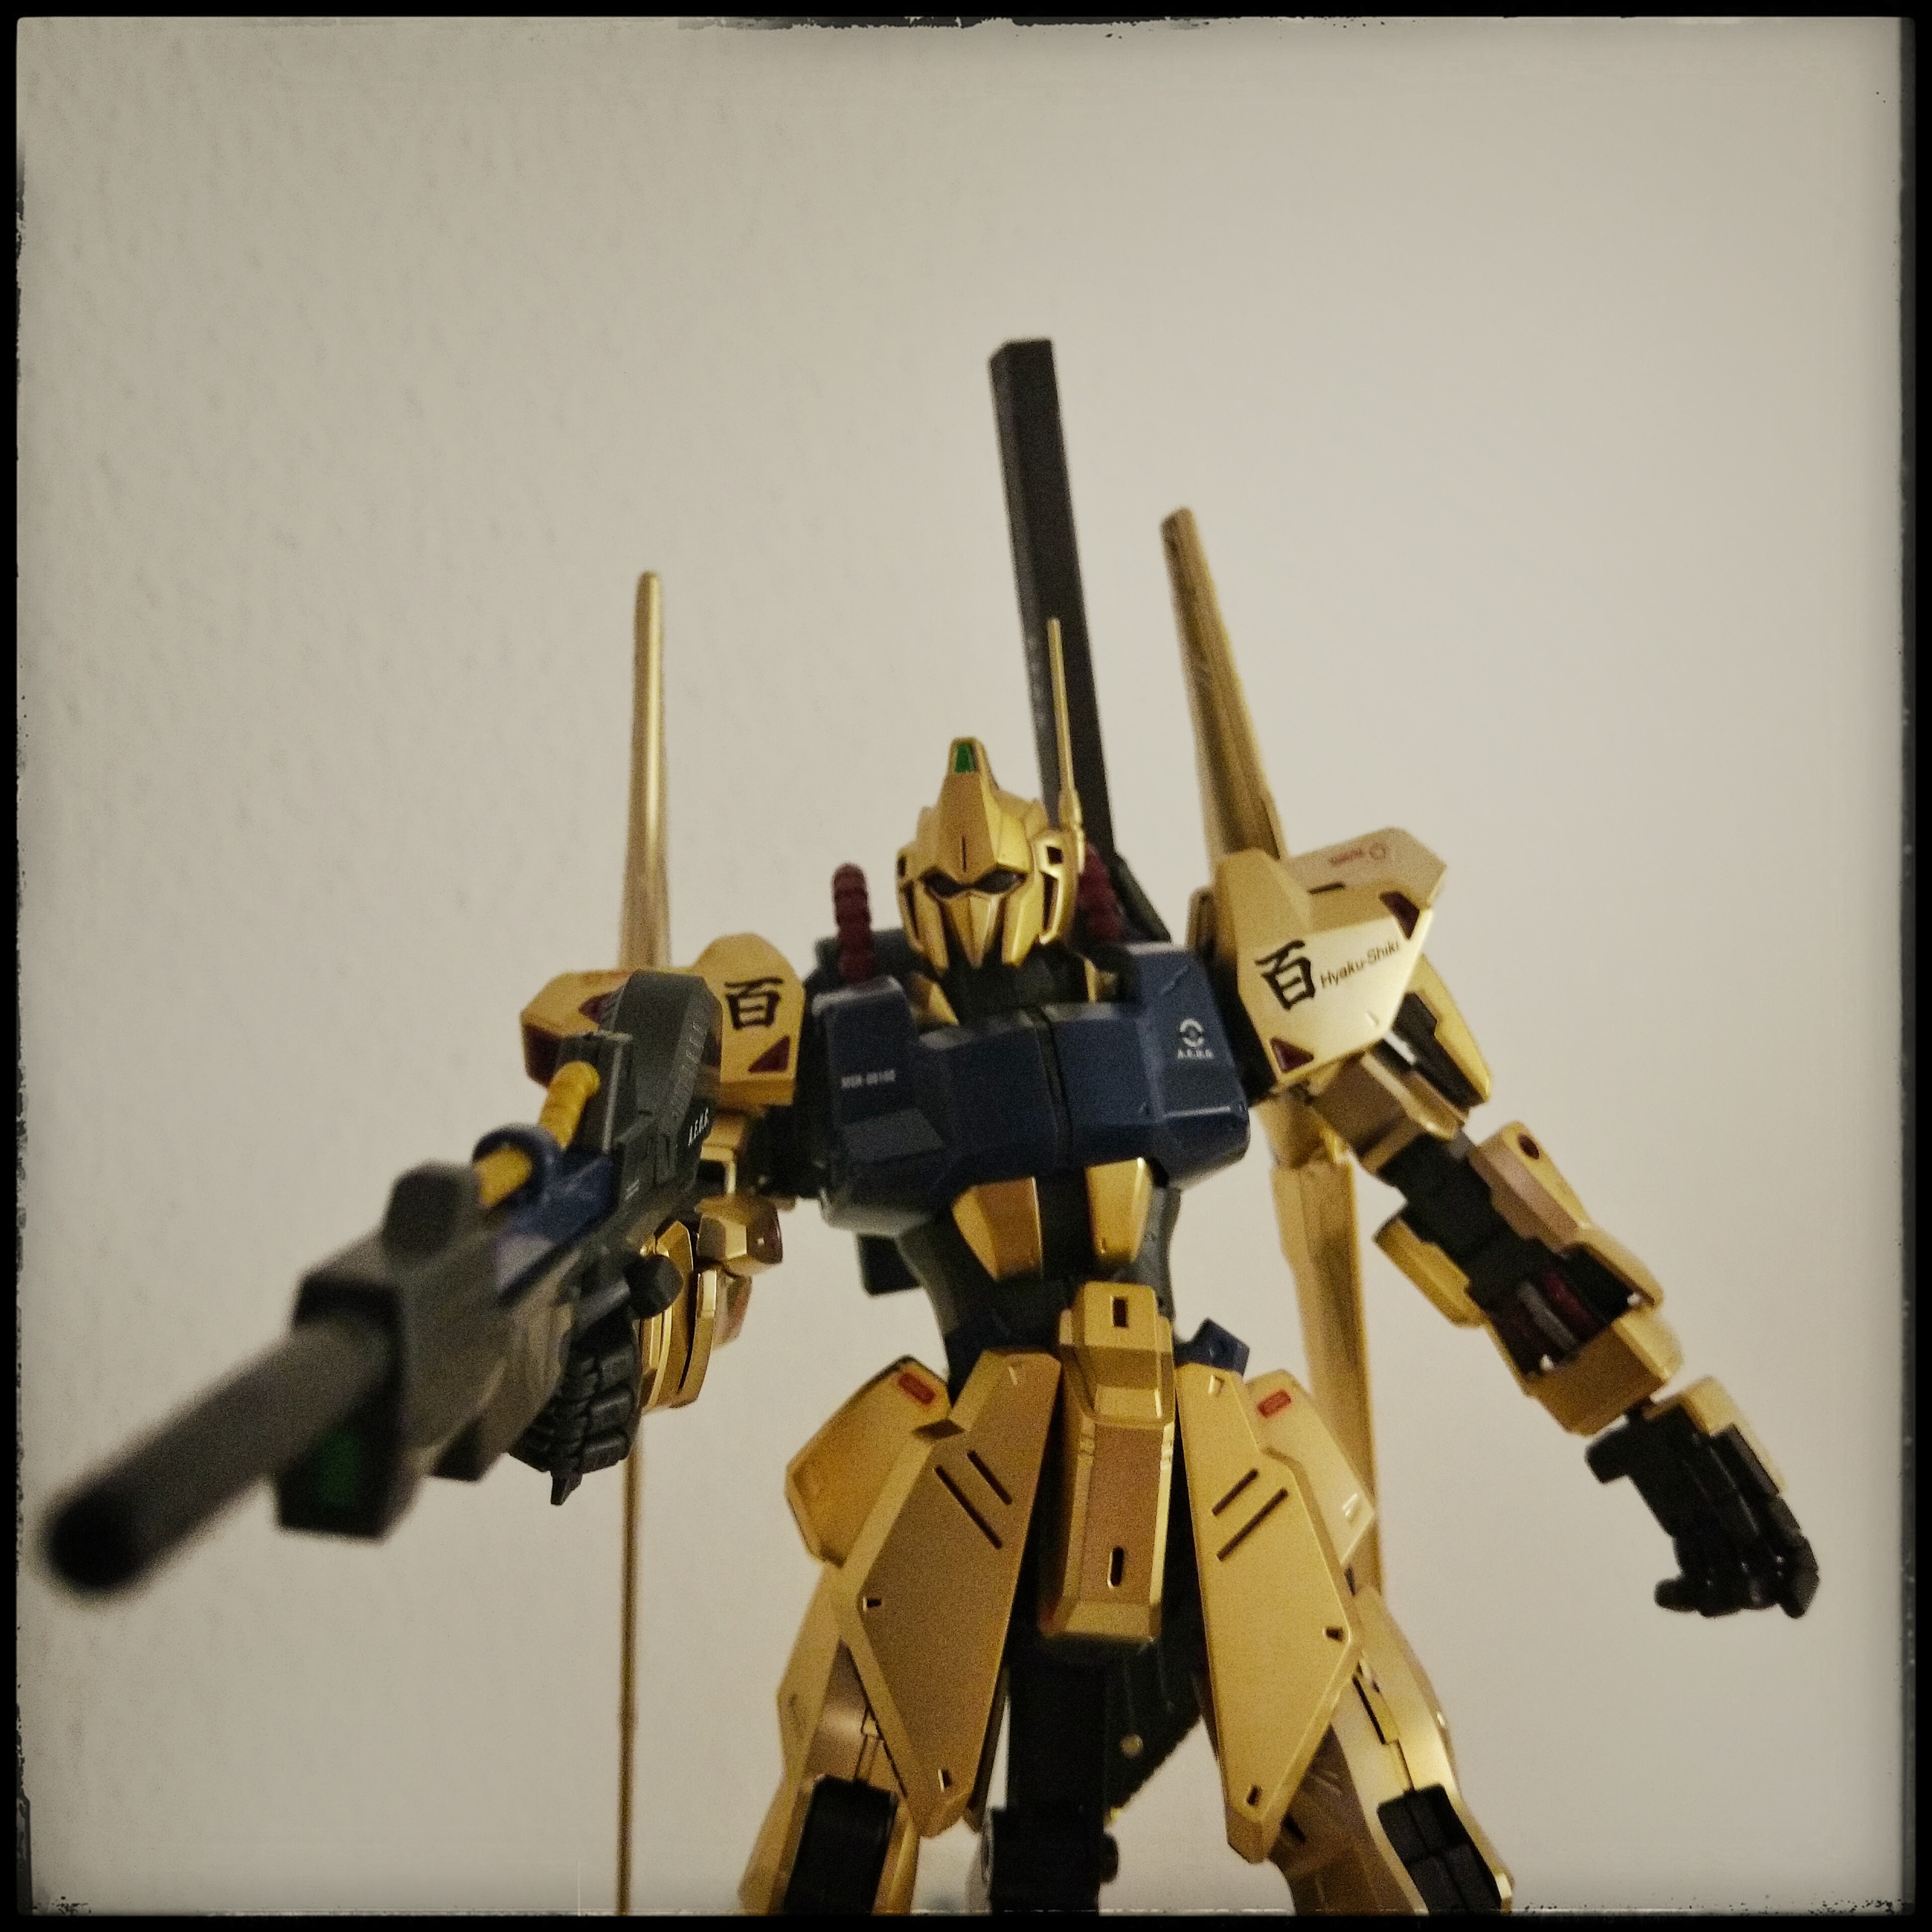 A MG with gold plated pieces